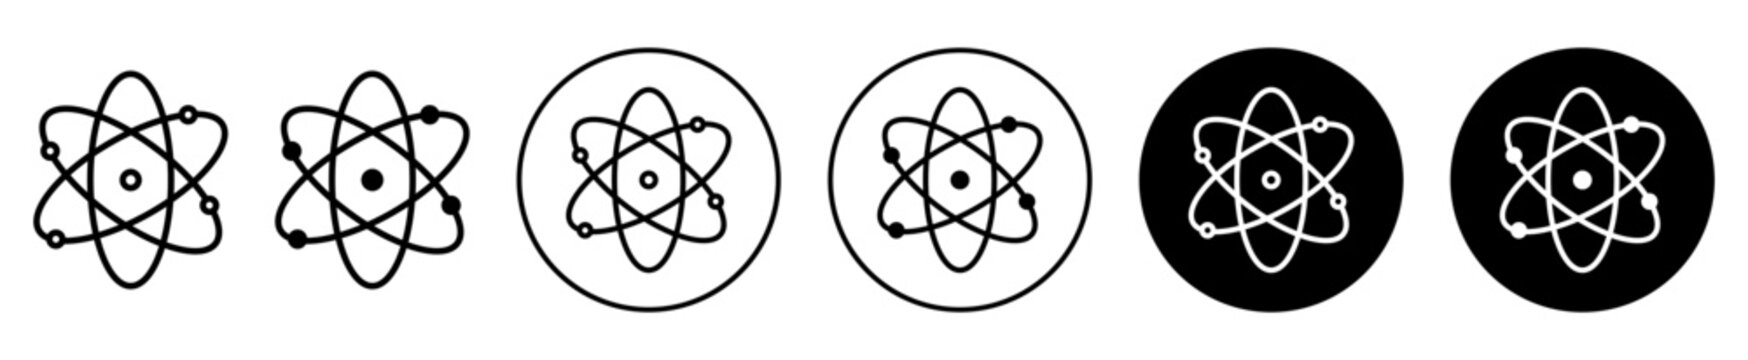 atom icon set. molecule nucleus science vector symbol. physics nuclear research sign. electron, proton, or neutron chemistry icon in black filled and outlined style.